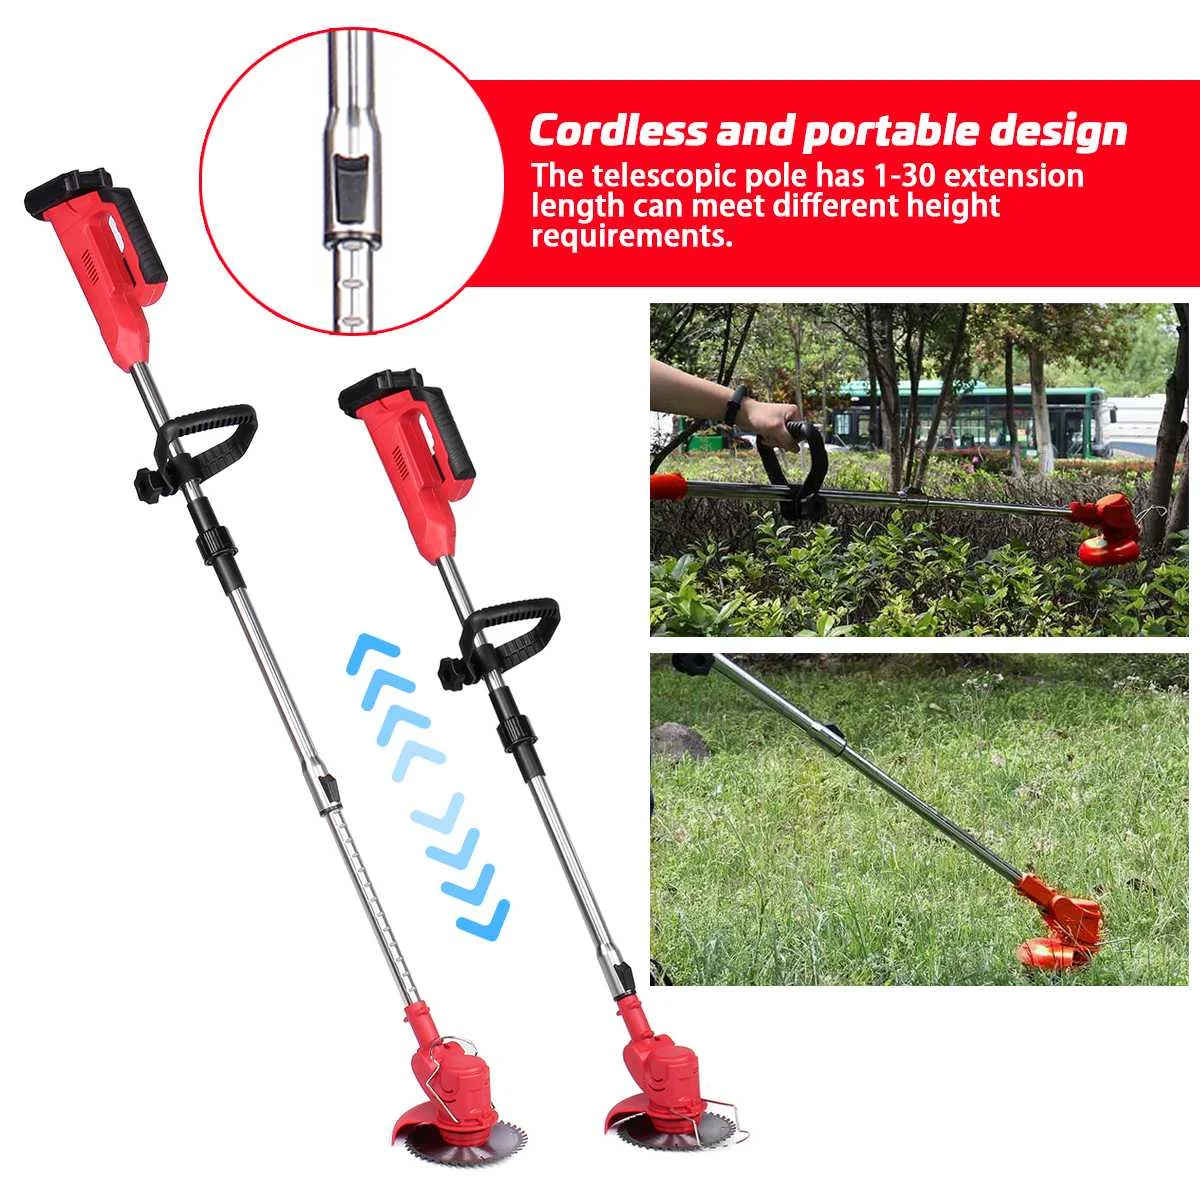 35000RPM 2000W 88VF Cordless Electric Grass Trimmer Lawn Mower Weeds Brush Collapsible Length Adjustable Cutter Garden